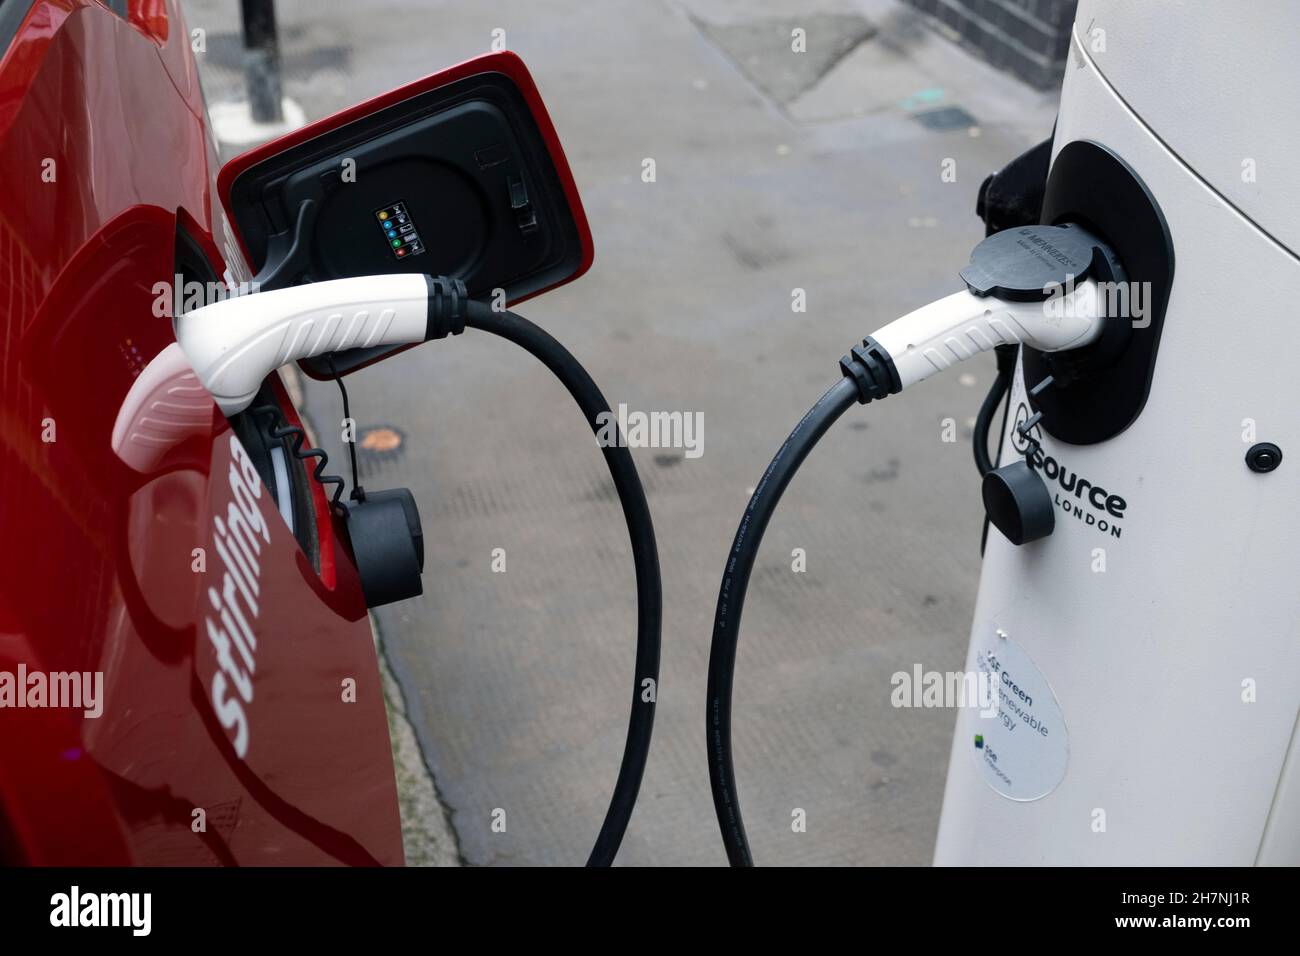 Car recharging at EV charge station on street in East London UK Stock Photo